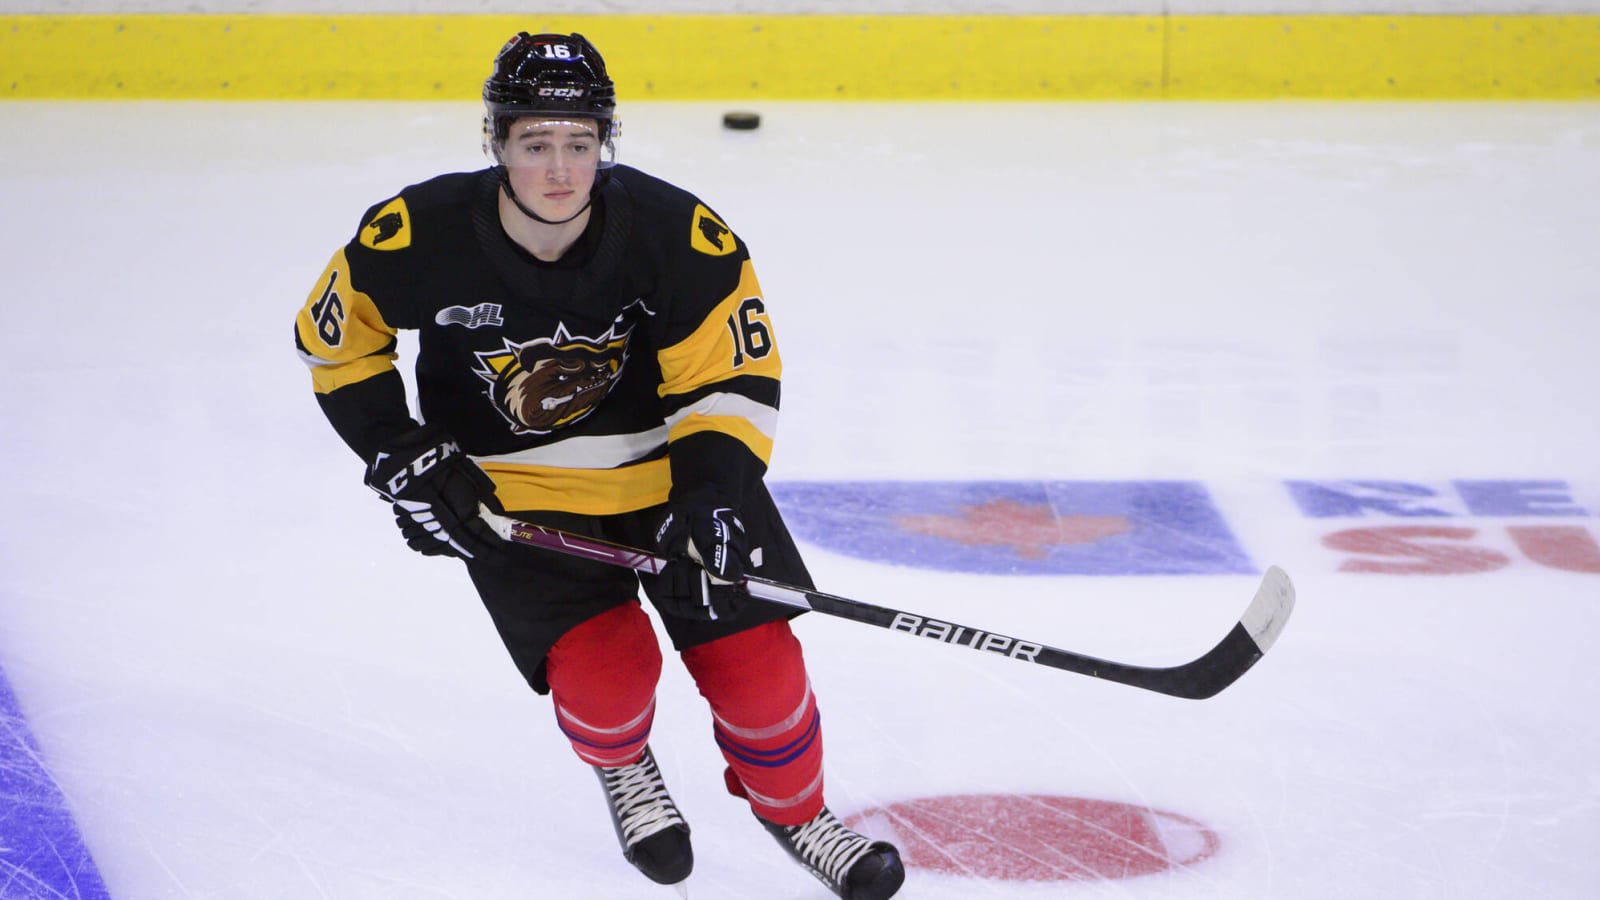 Emulating His Hockey Idol,  Nick Lardis Might Be a Steal for the Blackhawks